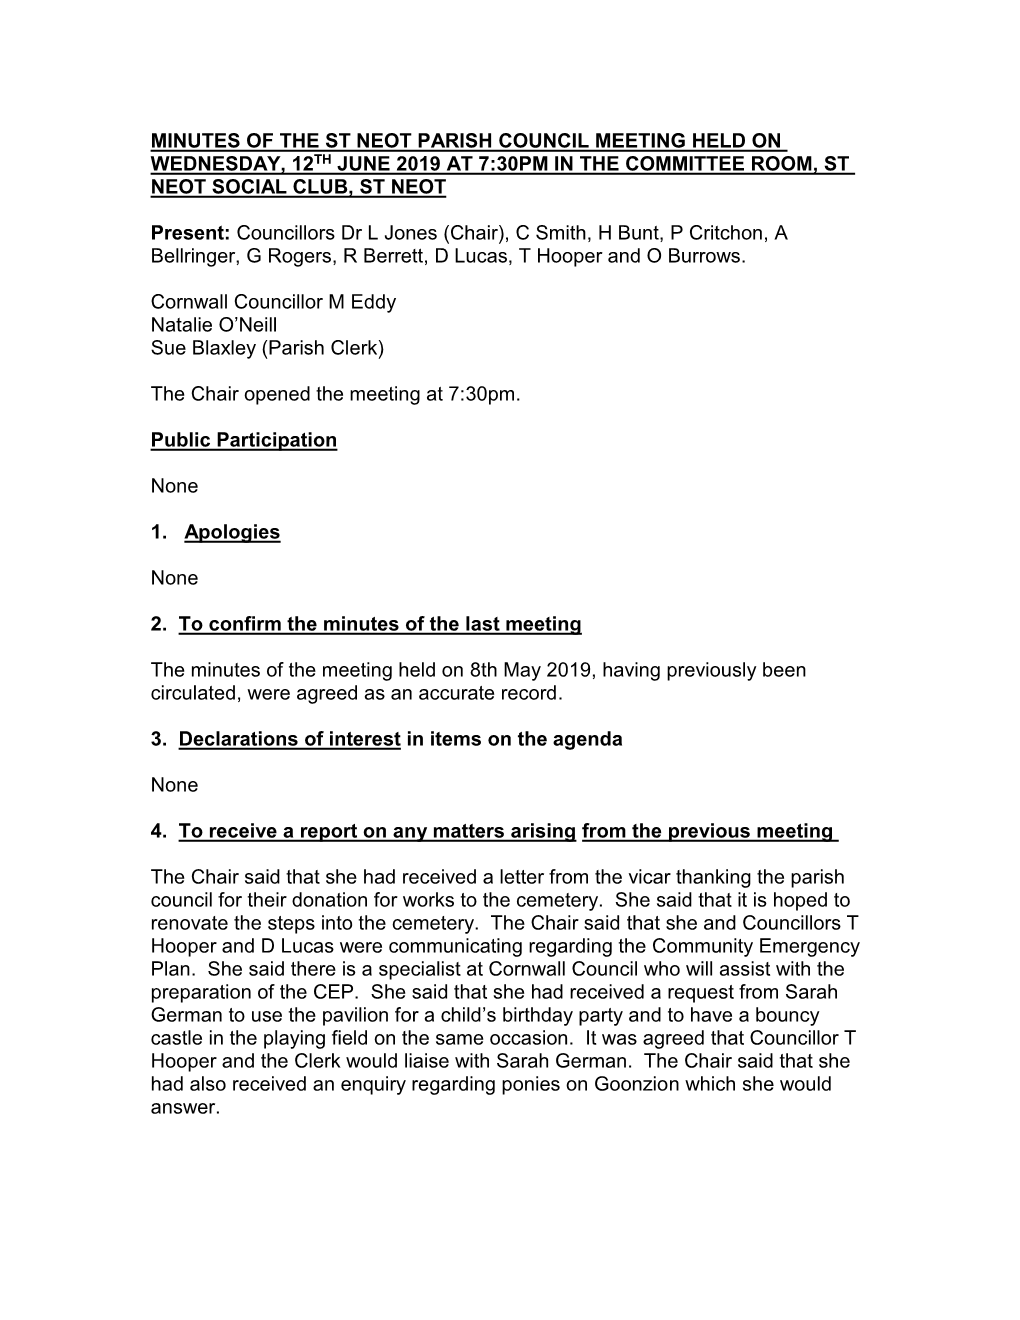 Minutes of the St Neot Parish Council Meeting Held on Wednesday, 12Th June 2019 at 7:30Pm in the Committee Room, St Neot Social Club, St Neot